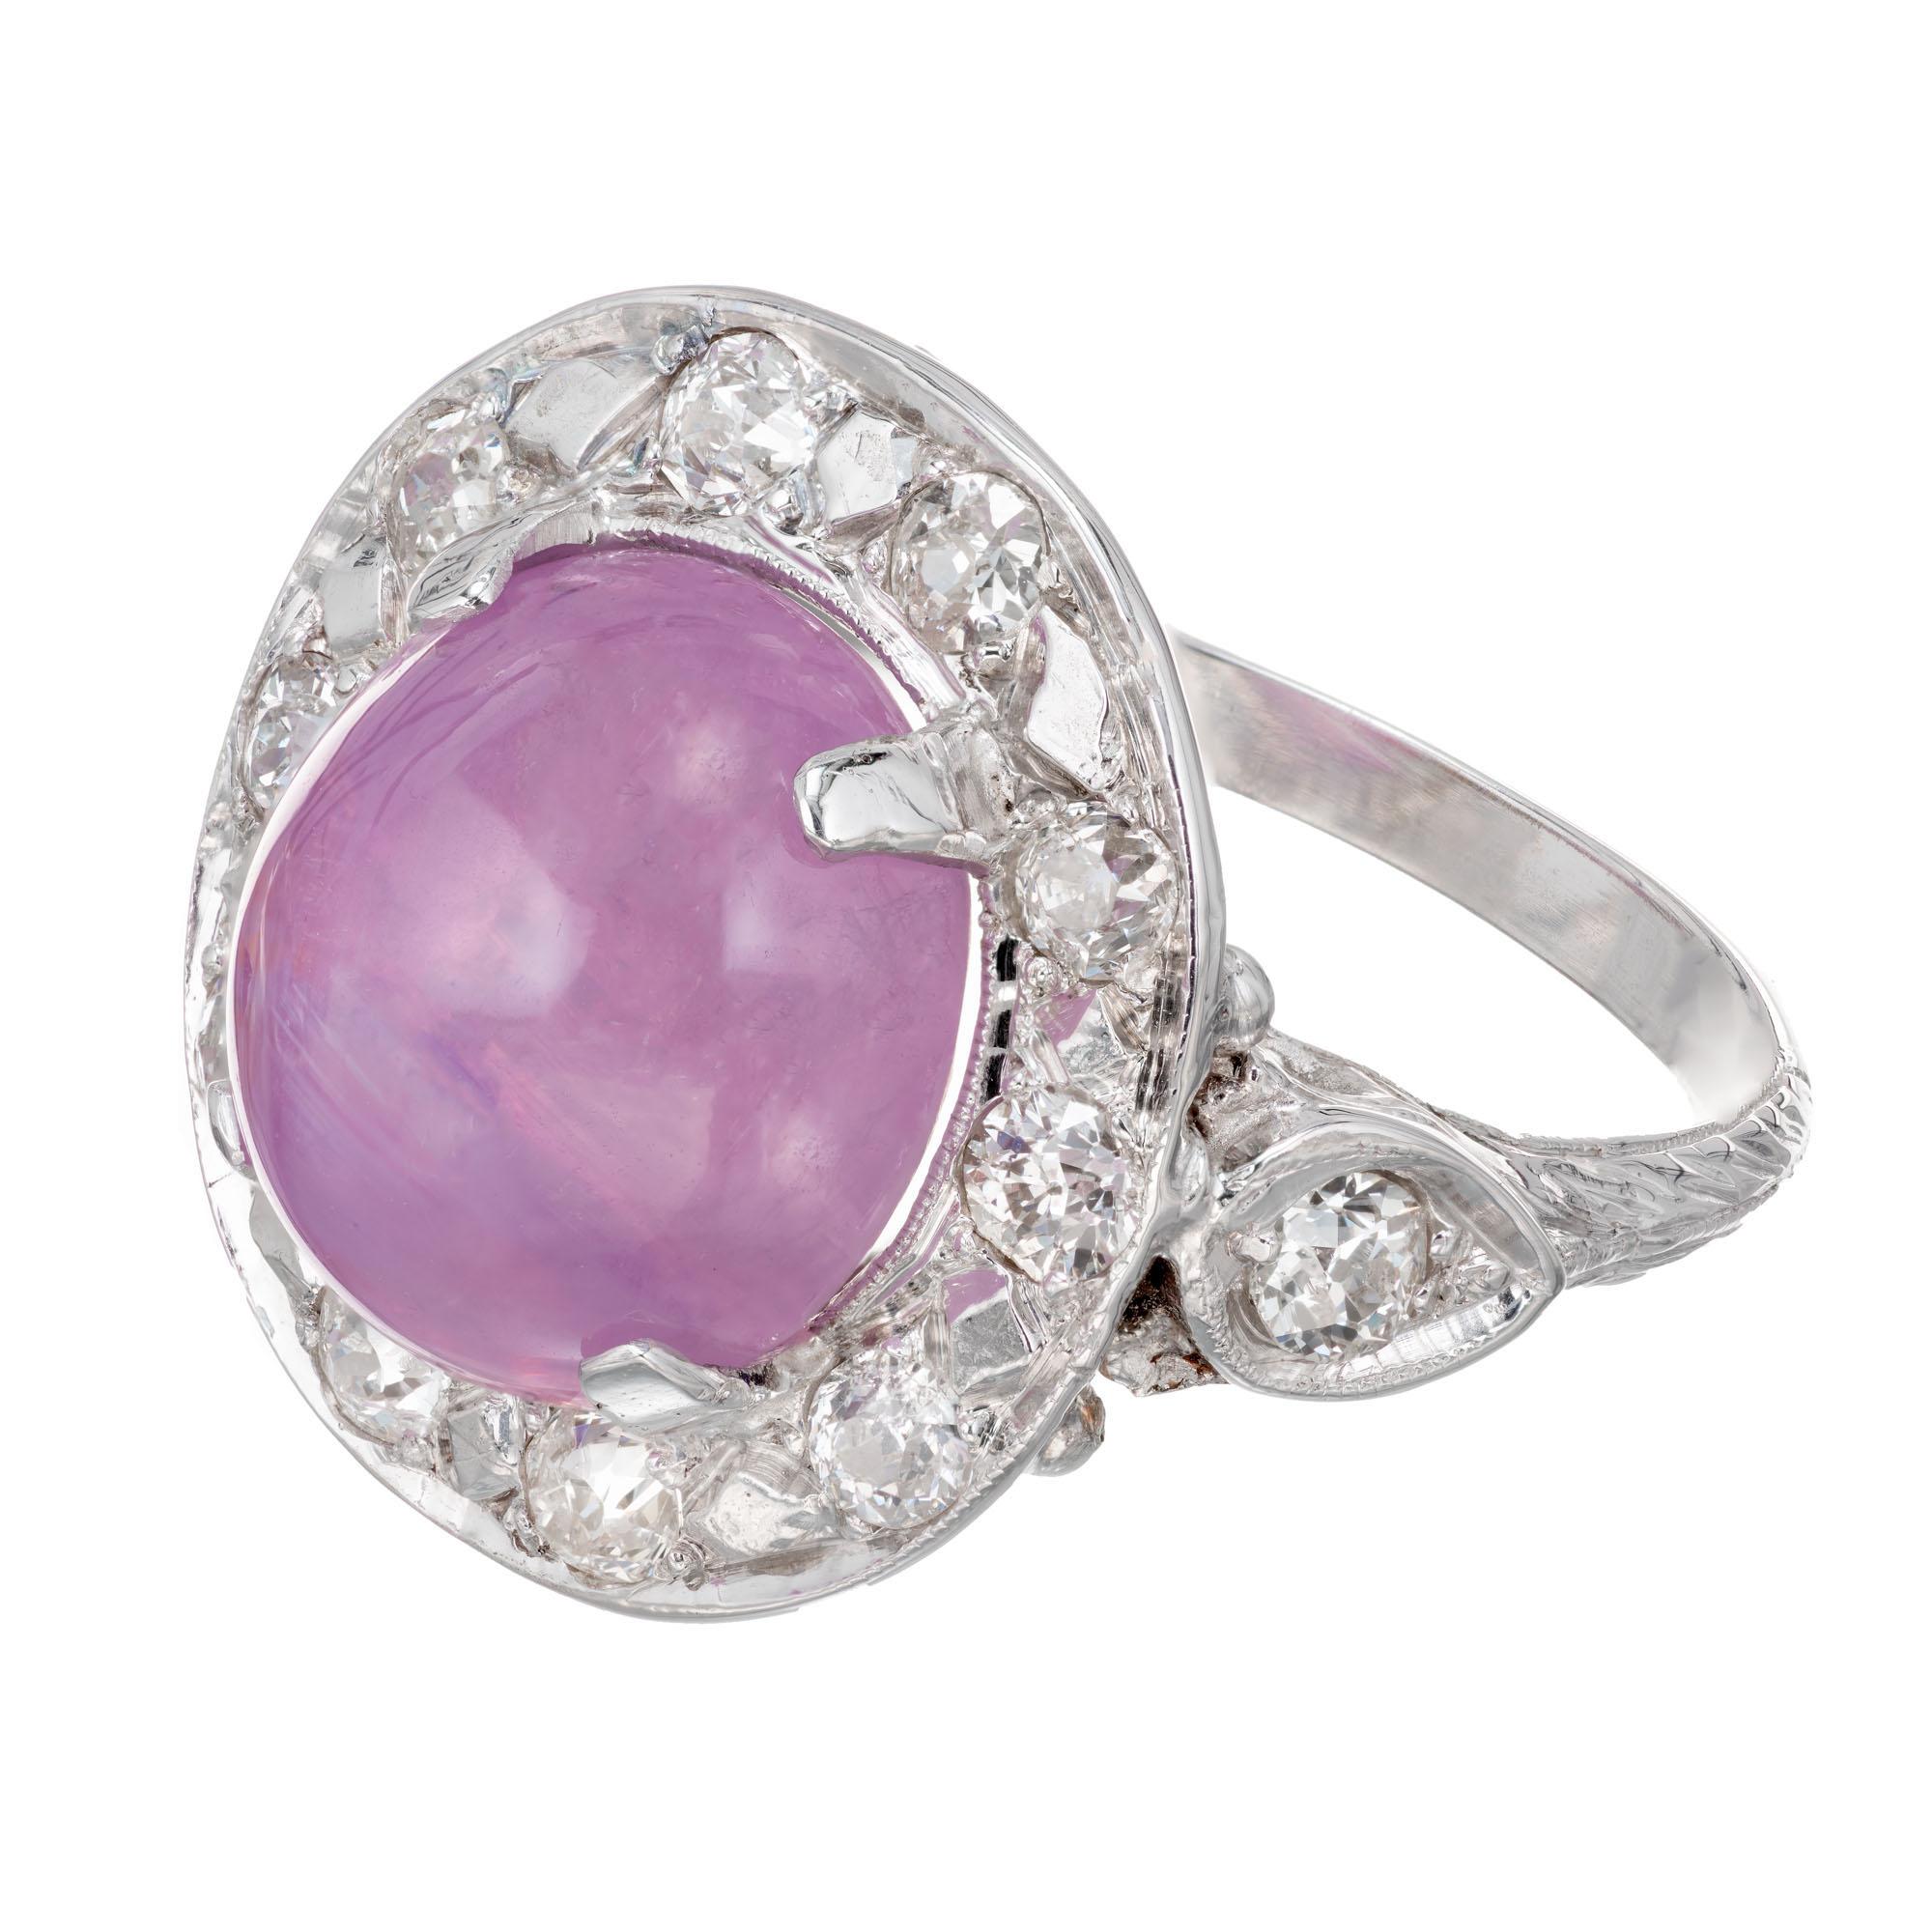 GIA certified natural purple pink cabochon star sapphire diamond ring. 7.77 carat oval center sapphire with a halo of 12 old European cut diamonds in a 14k white gold setting. Circa 1950's.

1 oval cabochon purplish pink star sapphire, approx.